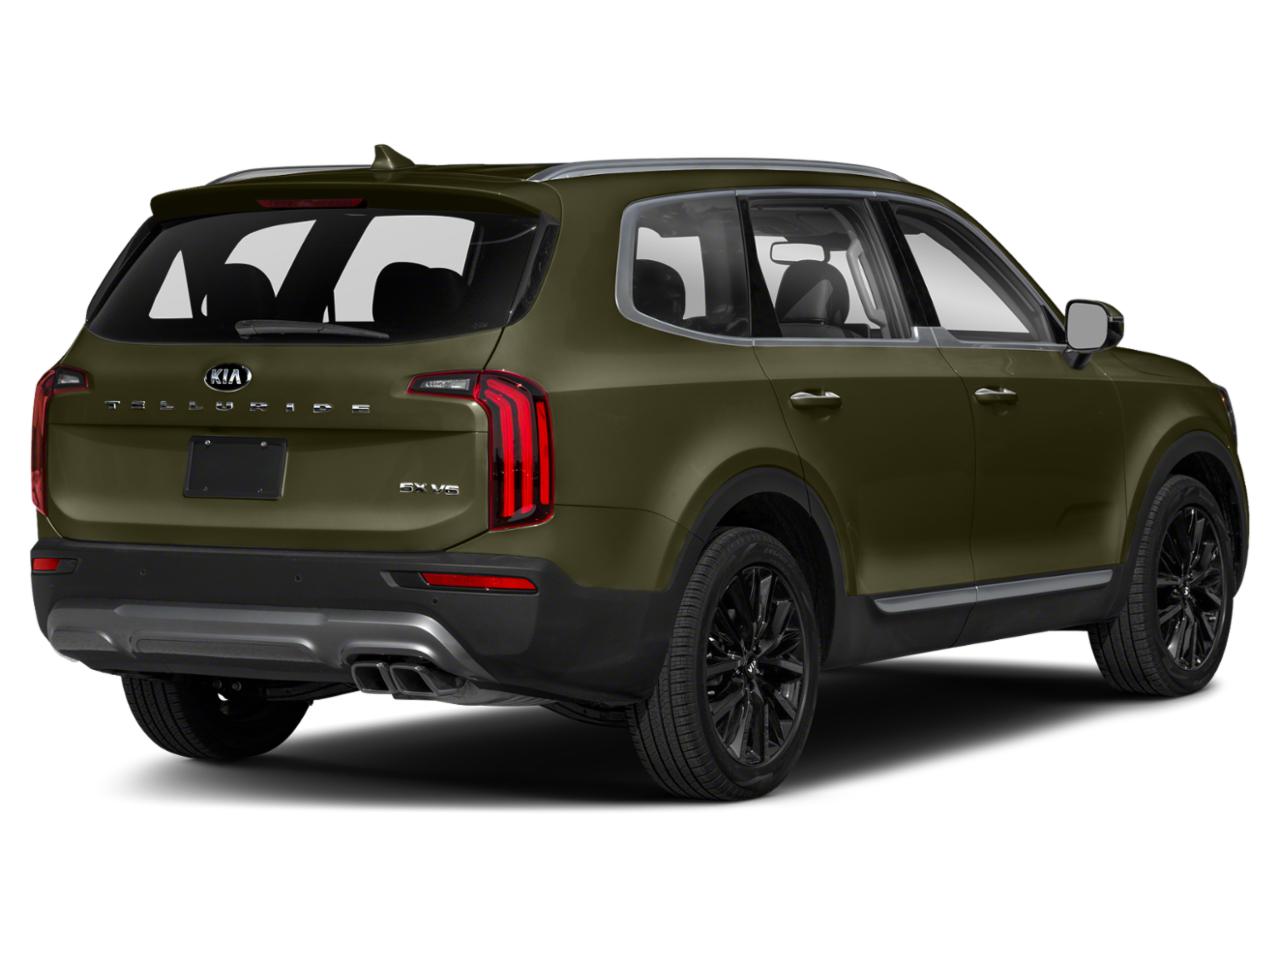 2020 Kia Telluride for sale in Winchester 5XYP5DHC3LG052615 Parsons Kia of Winchester